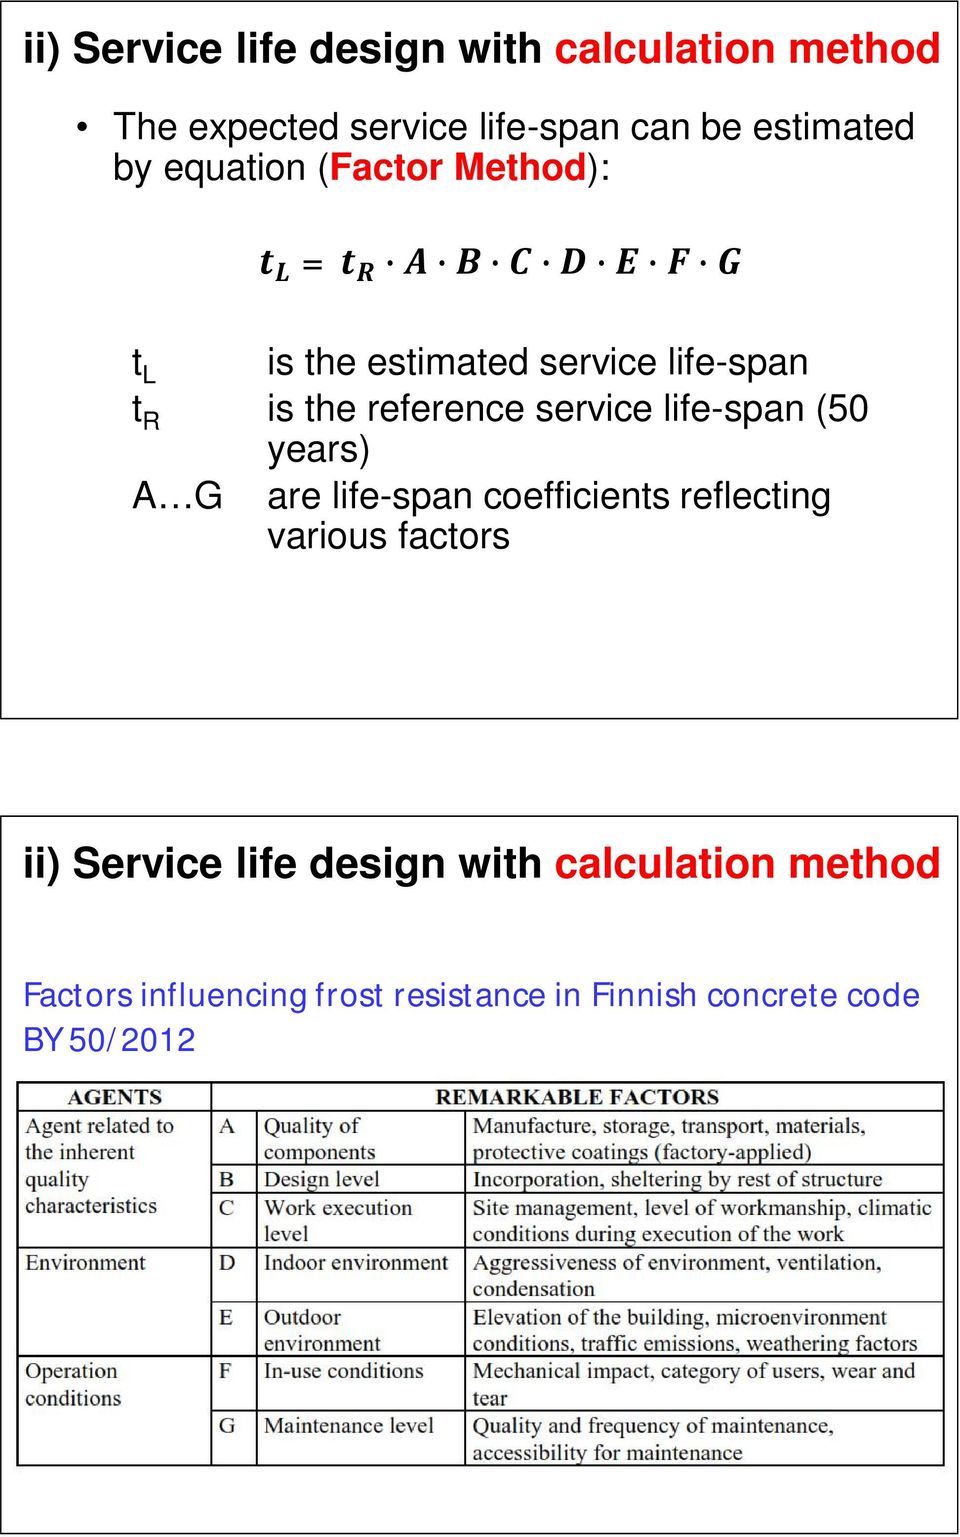 life-span (50 years) A G are life-span coefficients reflecting various factors ii) Service life